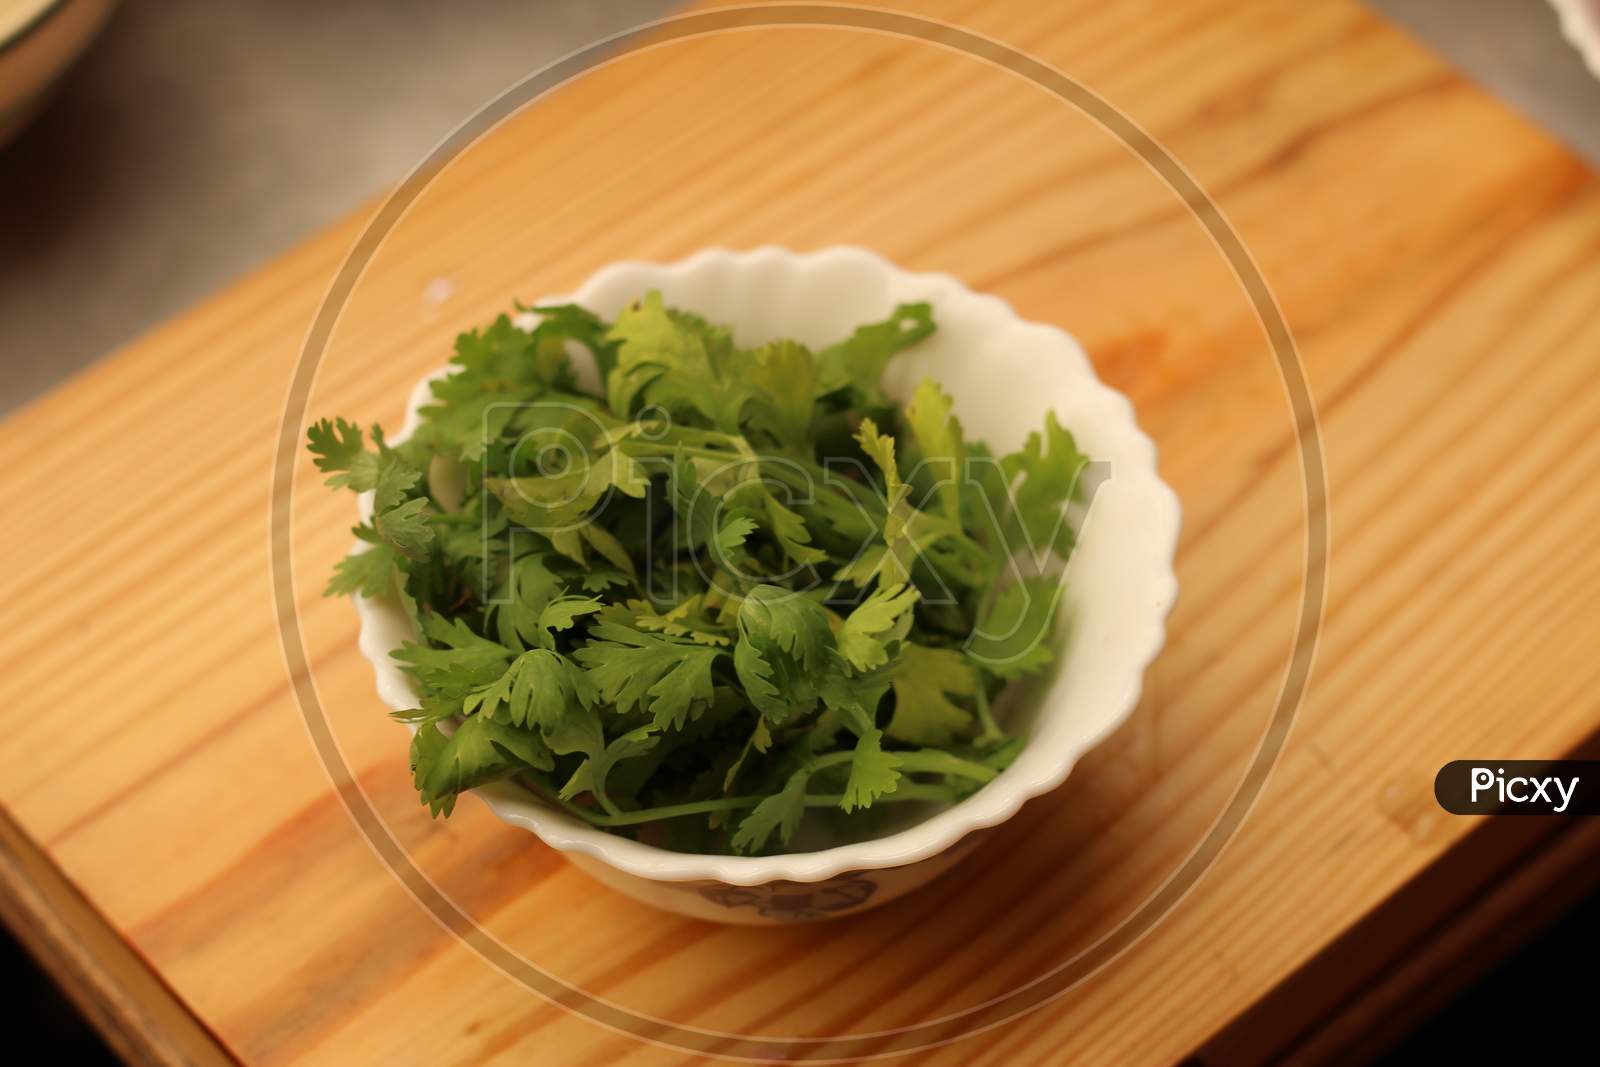 Coriander leaves in a white bowl.